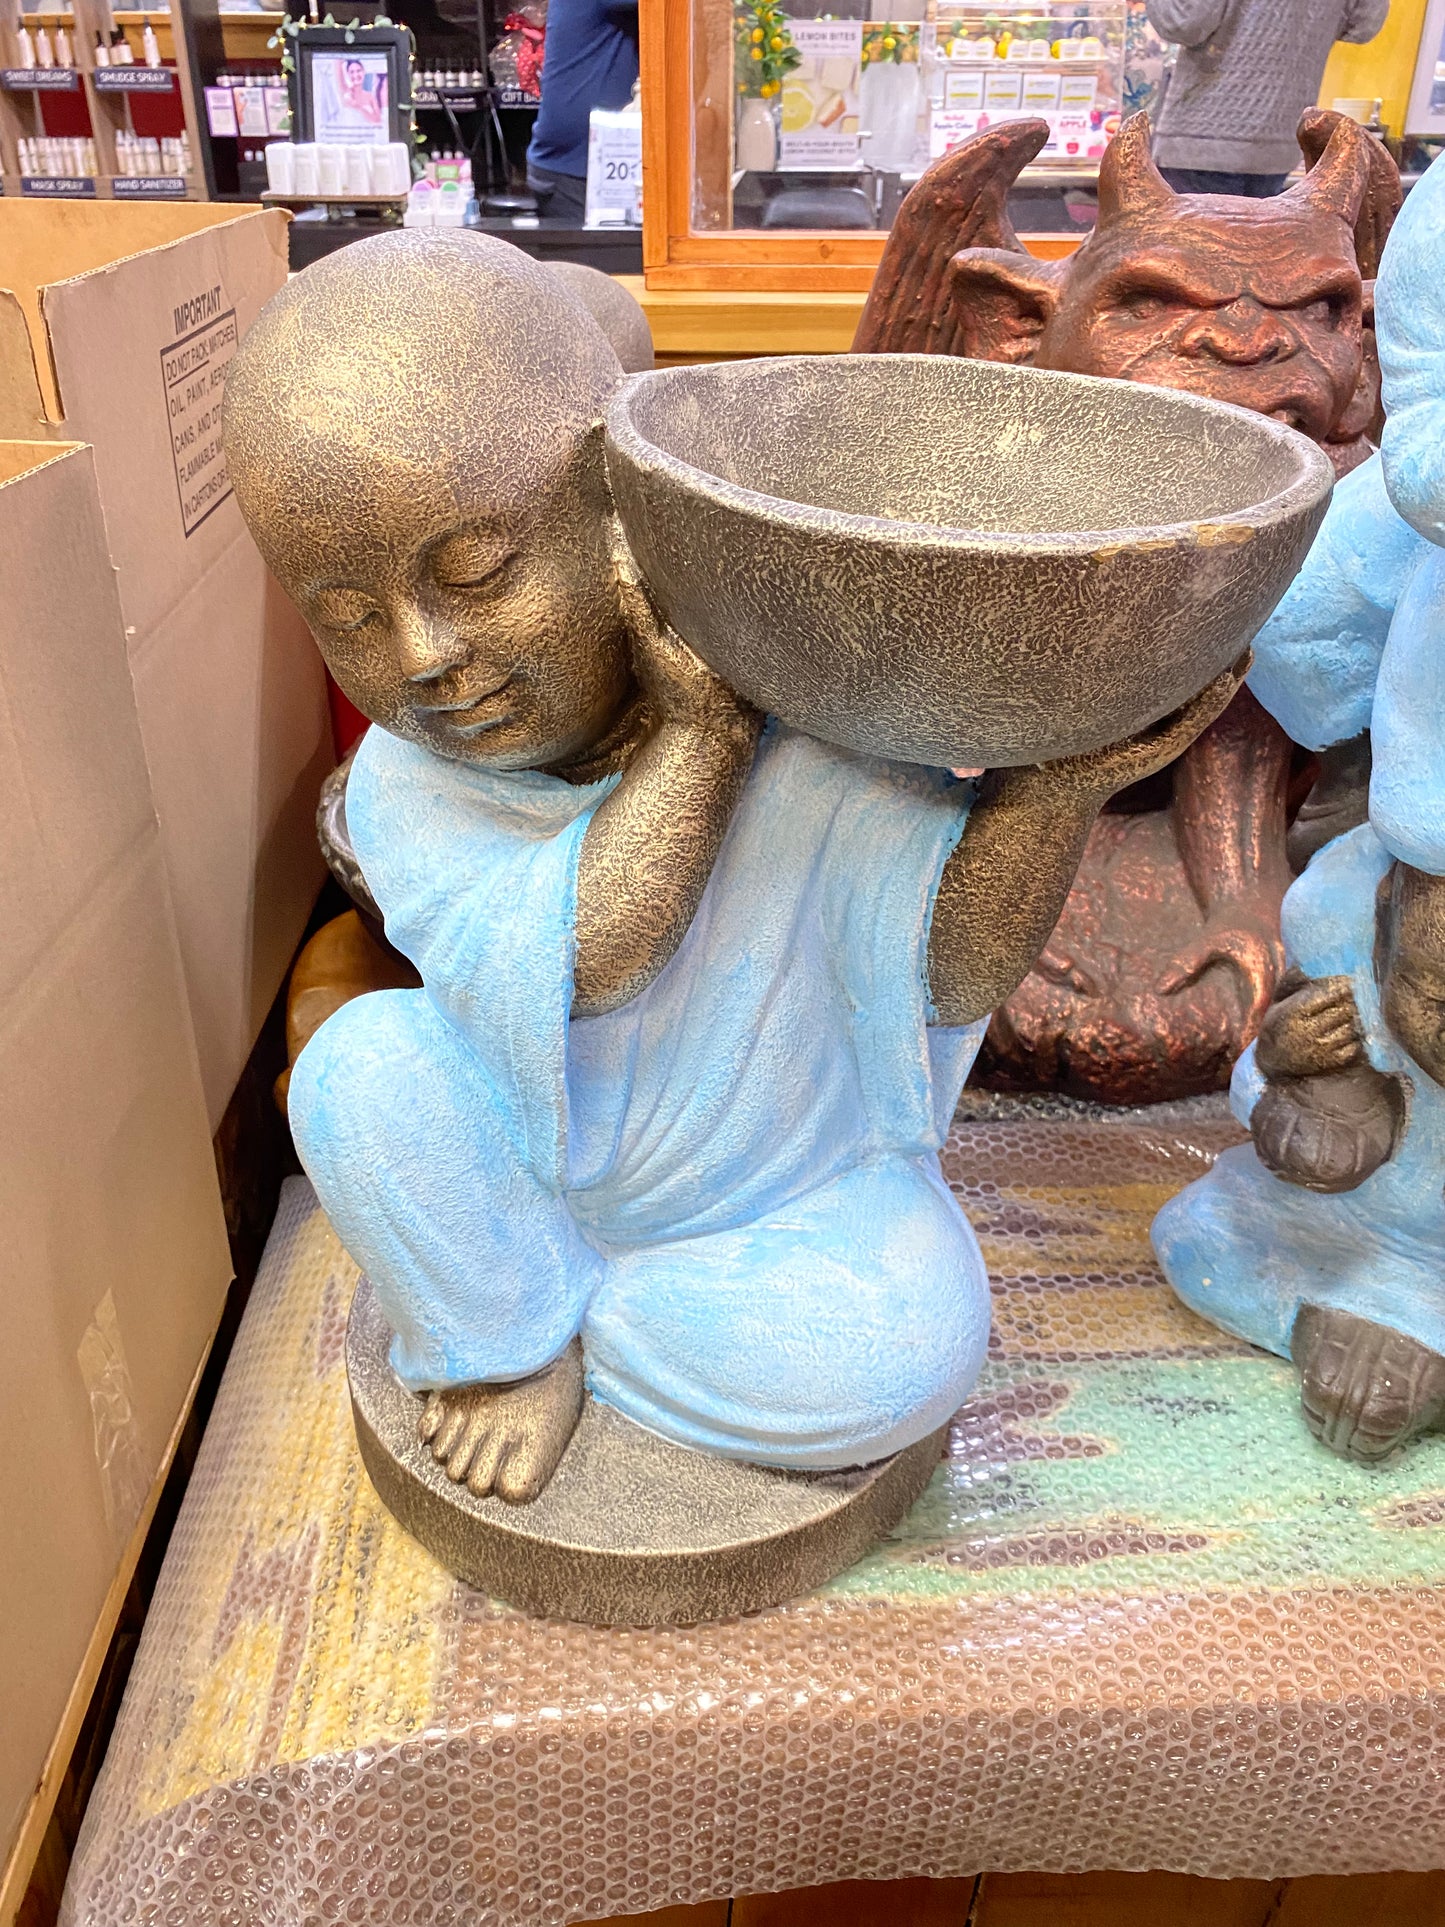 Monk with bowl on shoulder statue